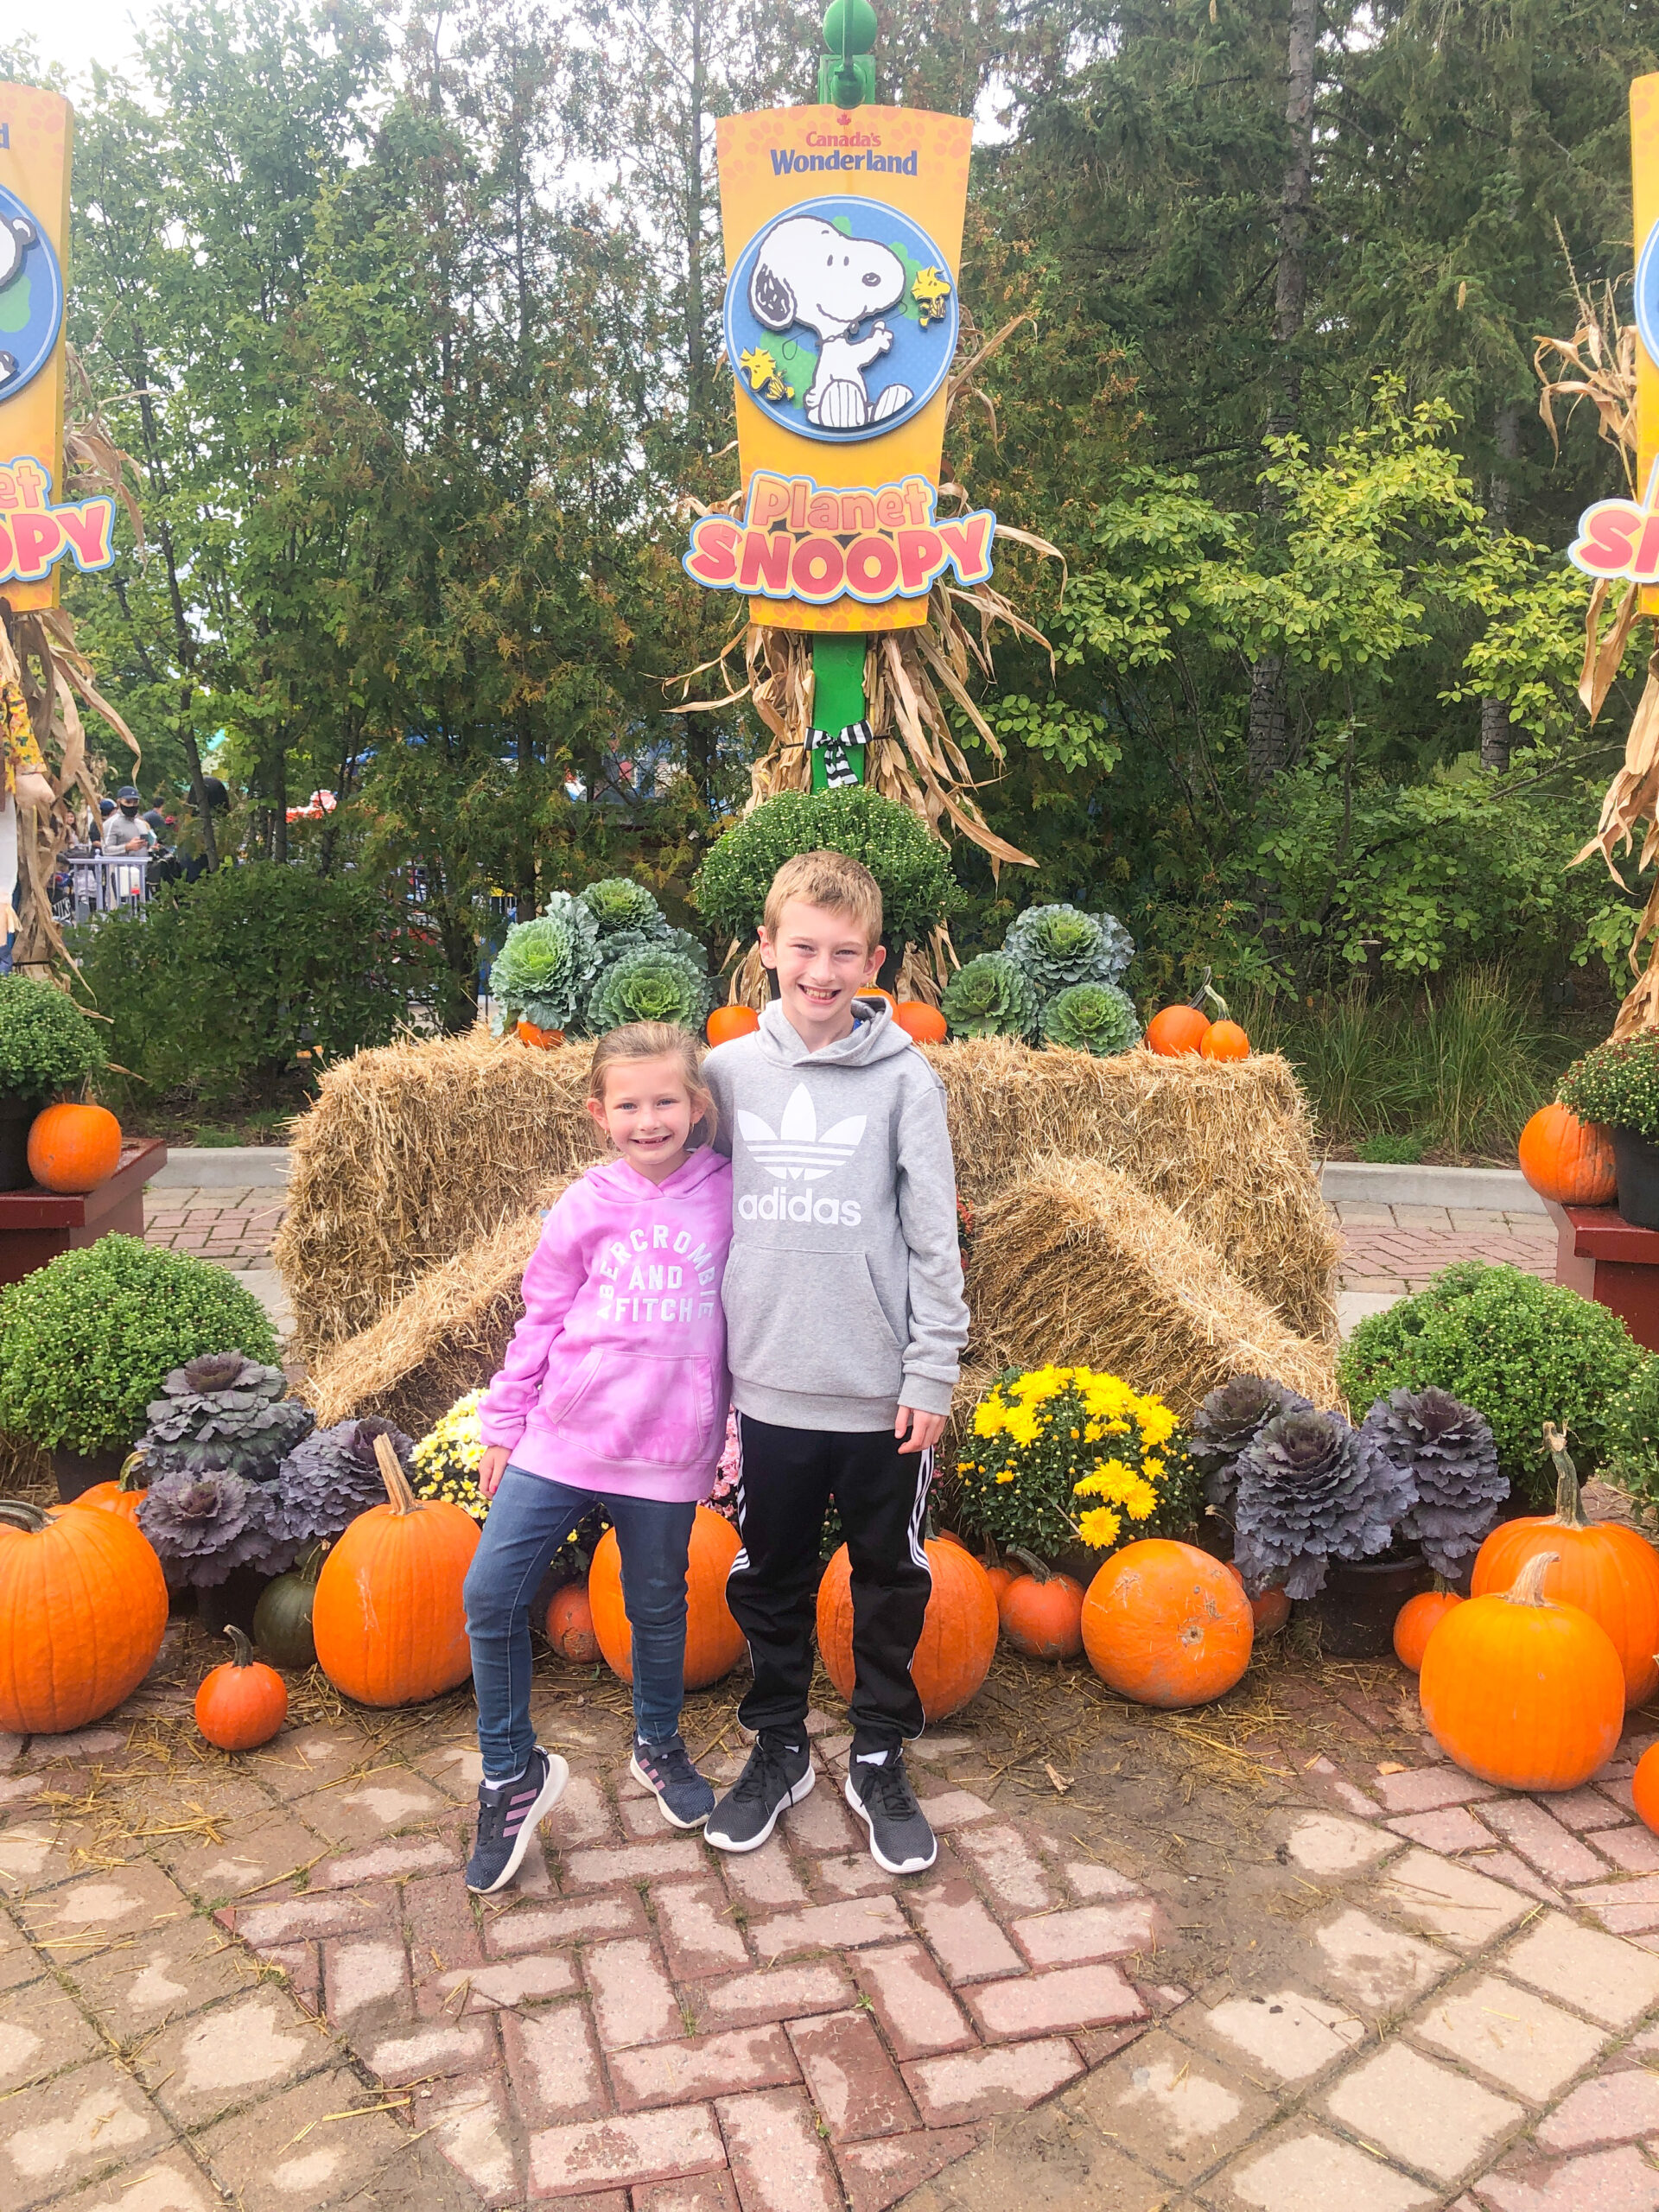 Camp Spooky at Canada's Wonderland on Livin' Life with Style